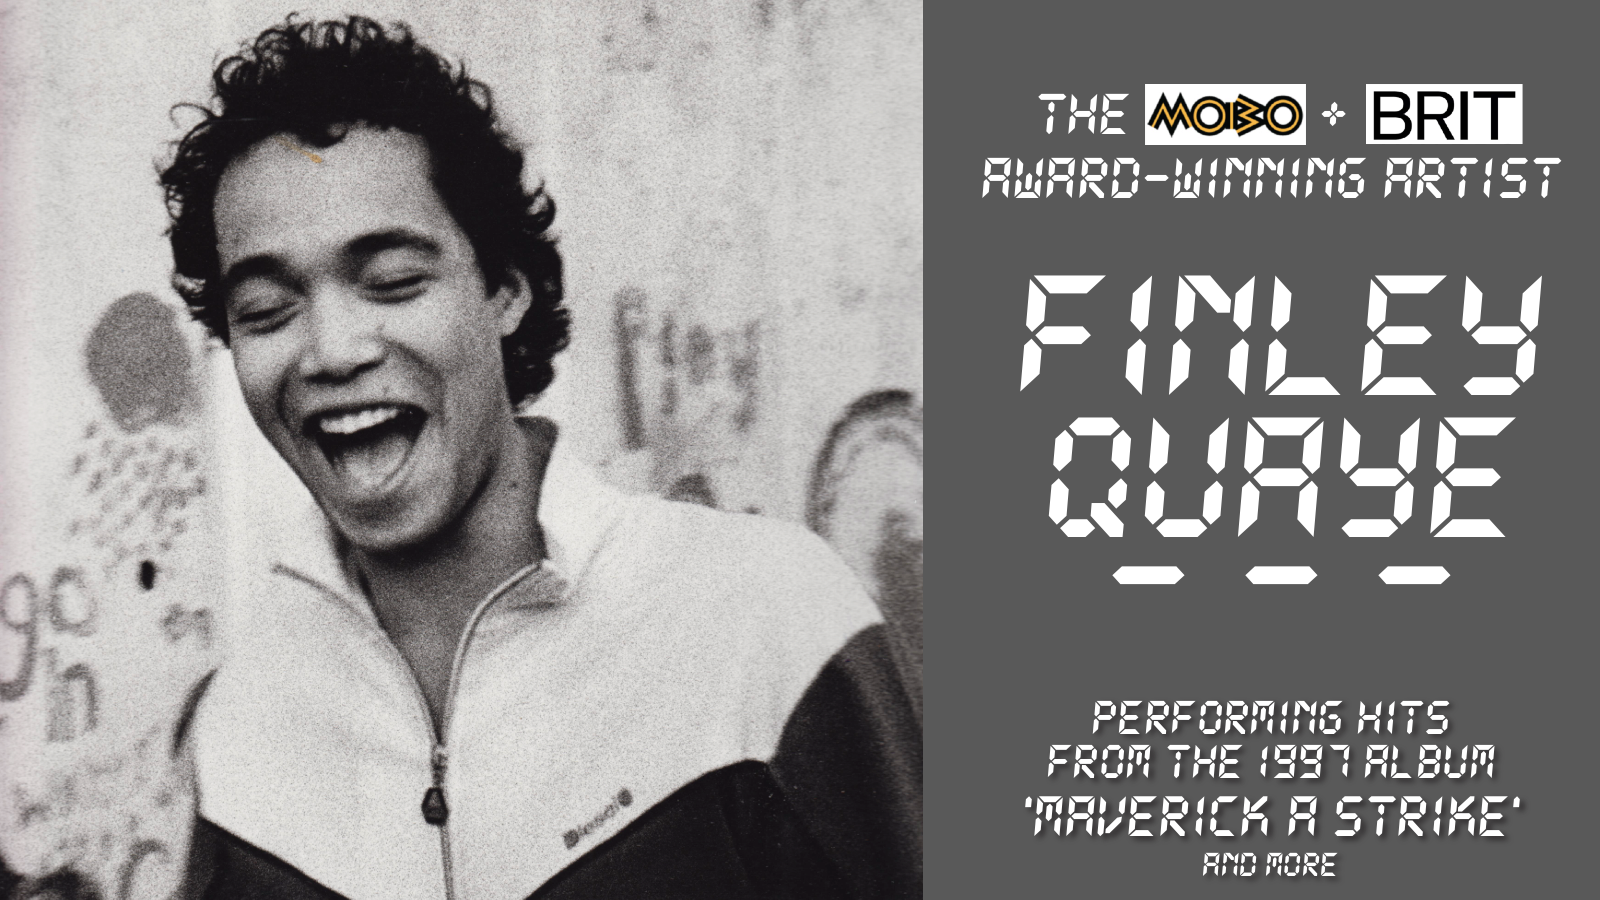 🚨 SOLD OUT! LIMITED RE-SALE TICKETS ONLY! ⭐️ Finley Quaye in concert! The MOBO + BRIT award-winning artist + special guest